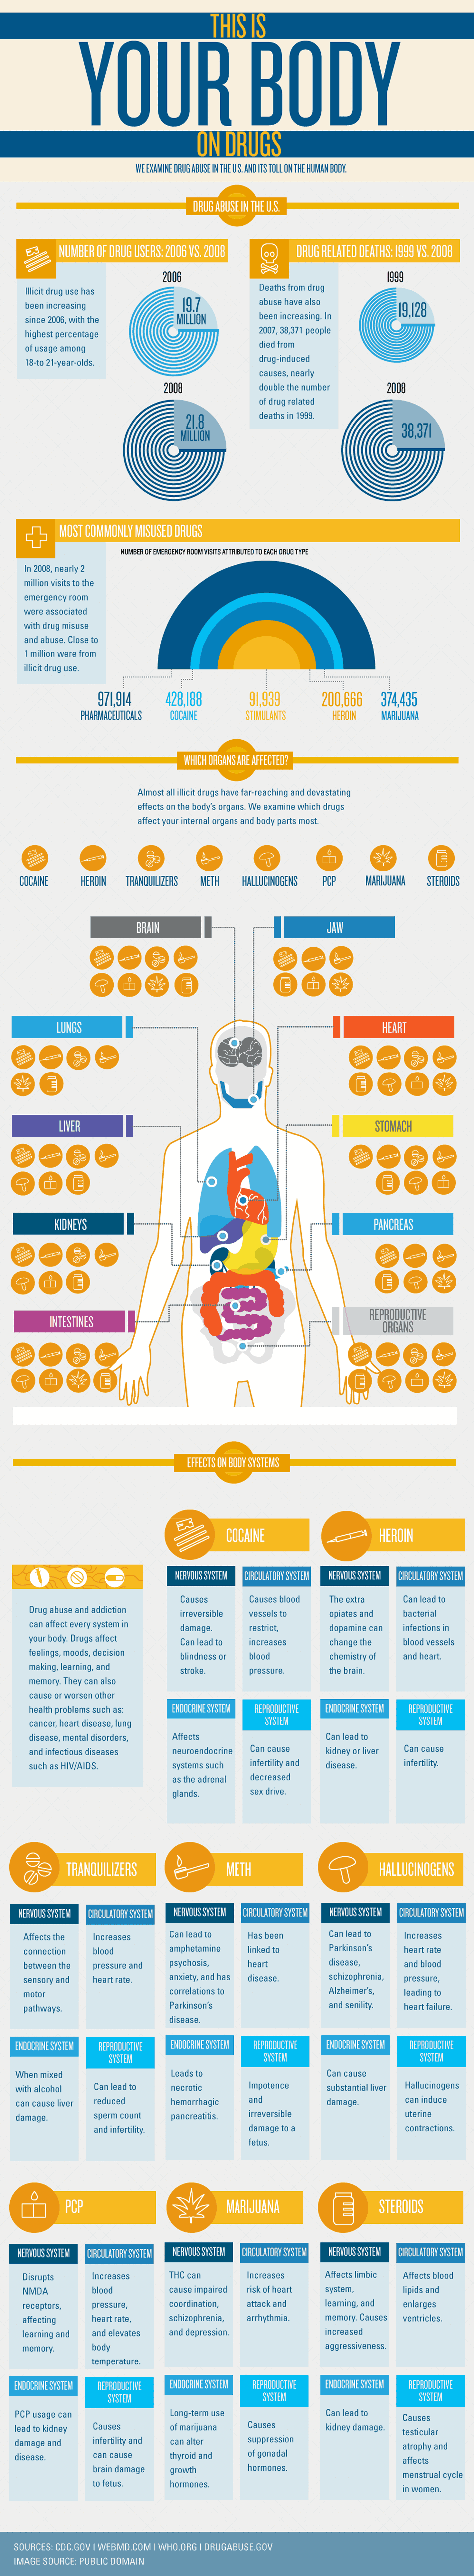 Drug Abuse and Your Body  Infographic